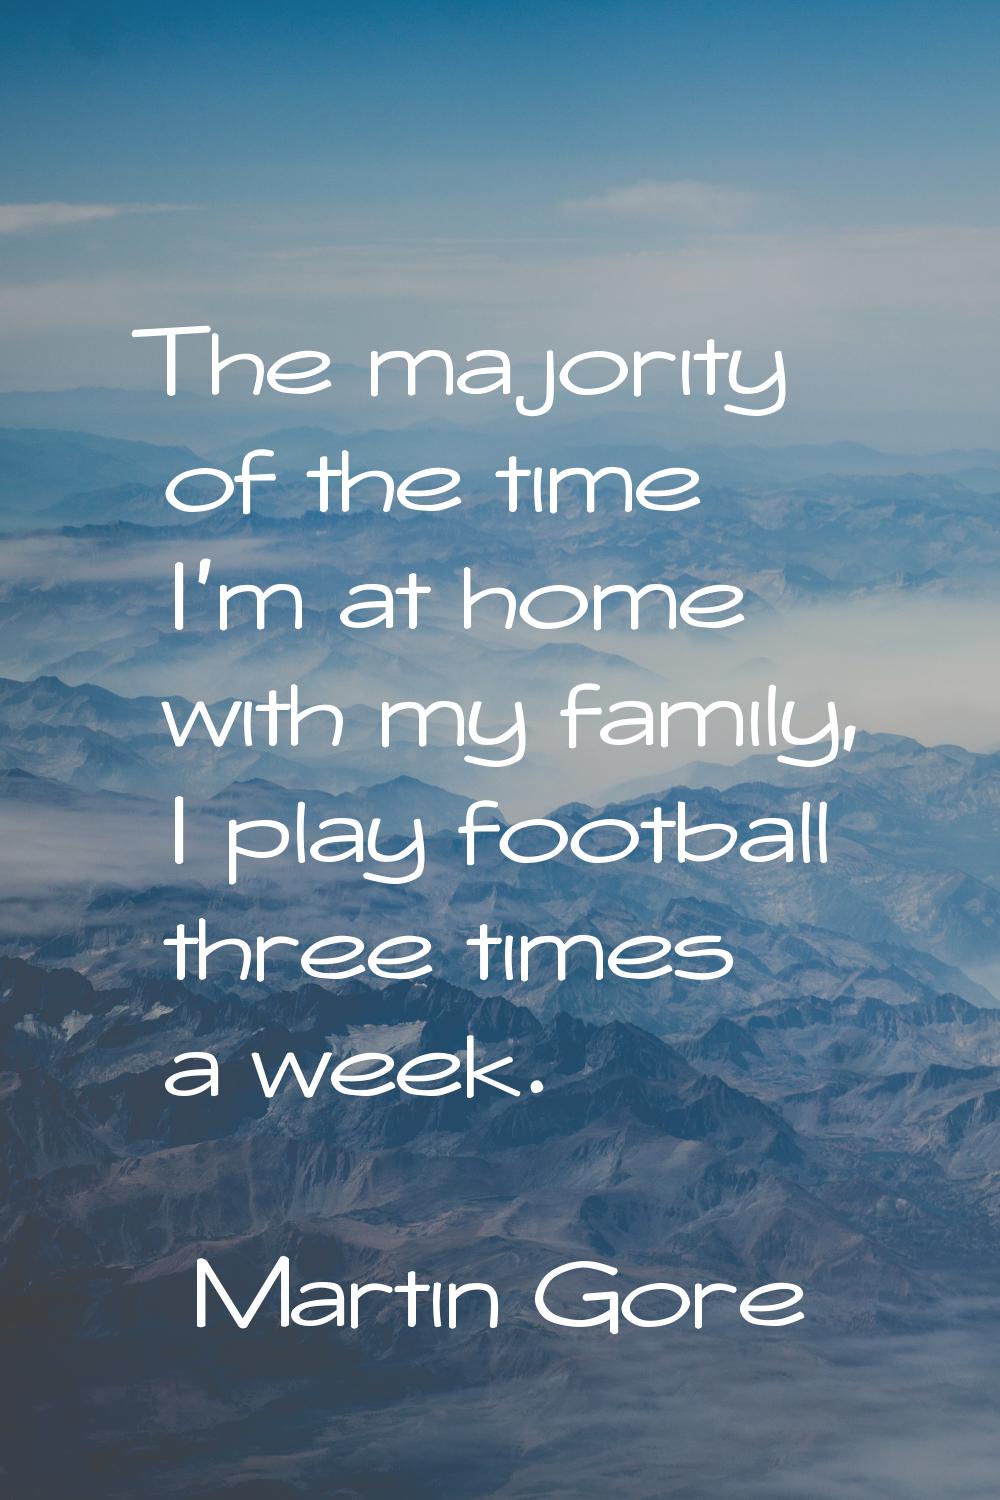 The majority of the time I'm at home with my family, I play football three times a week.